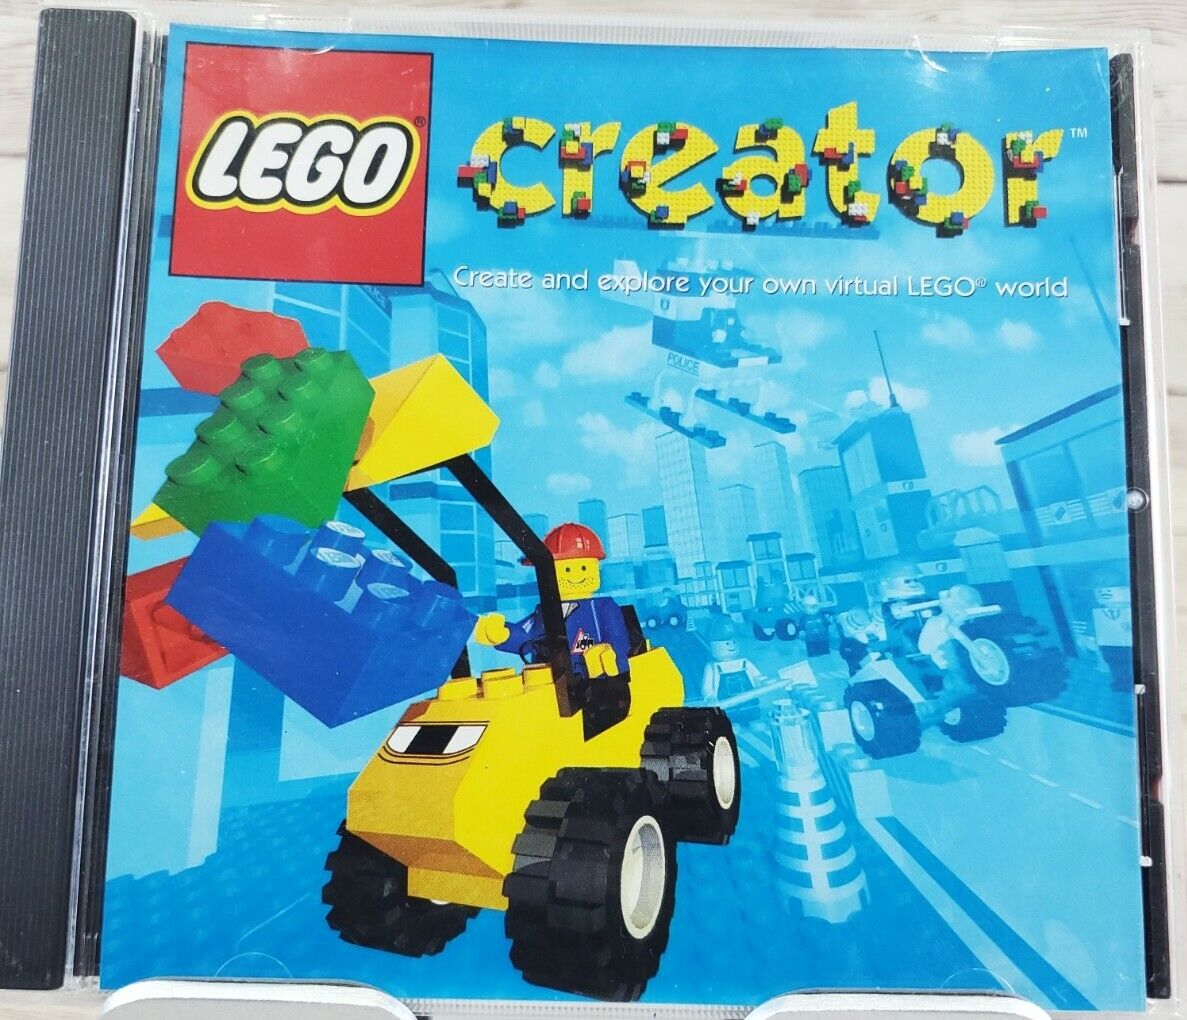 LEGO CREATOR CD-ROM Software 1998 Constructive 3D virtual world age 8 and up